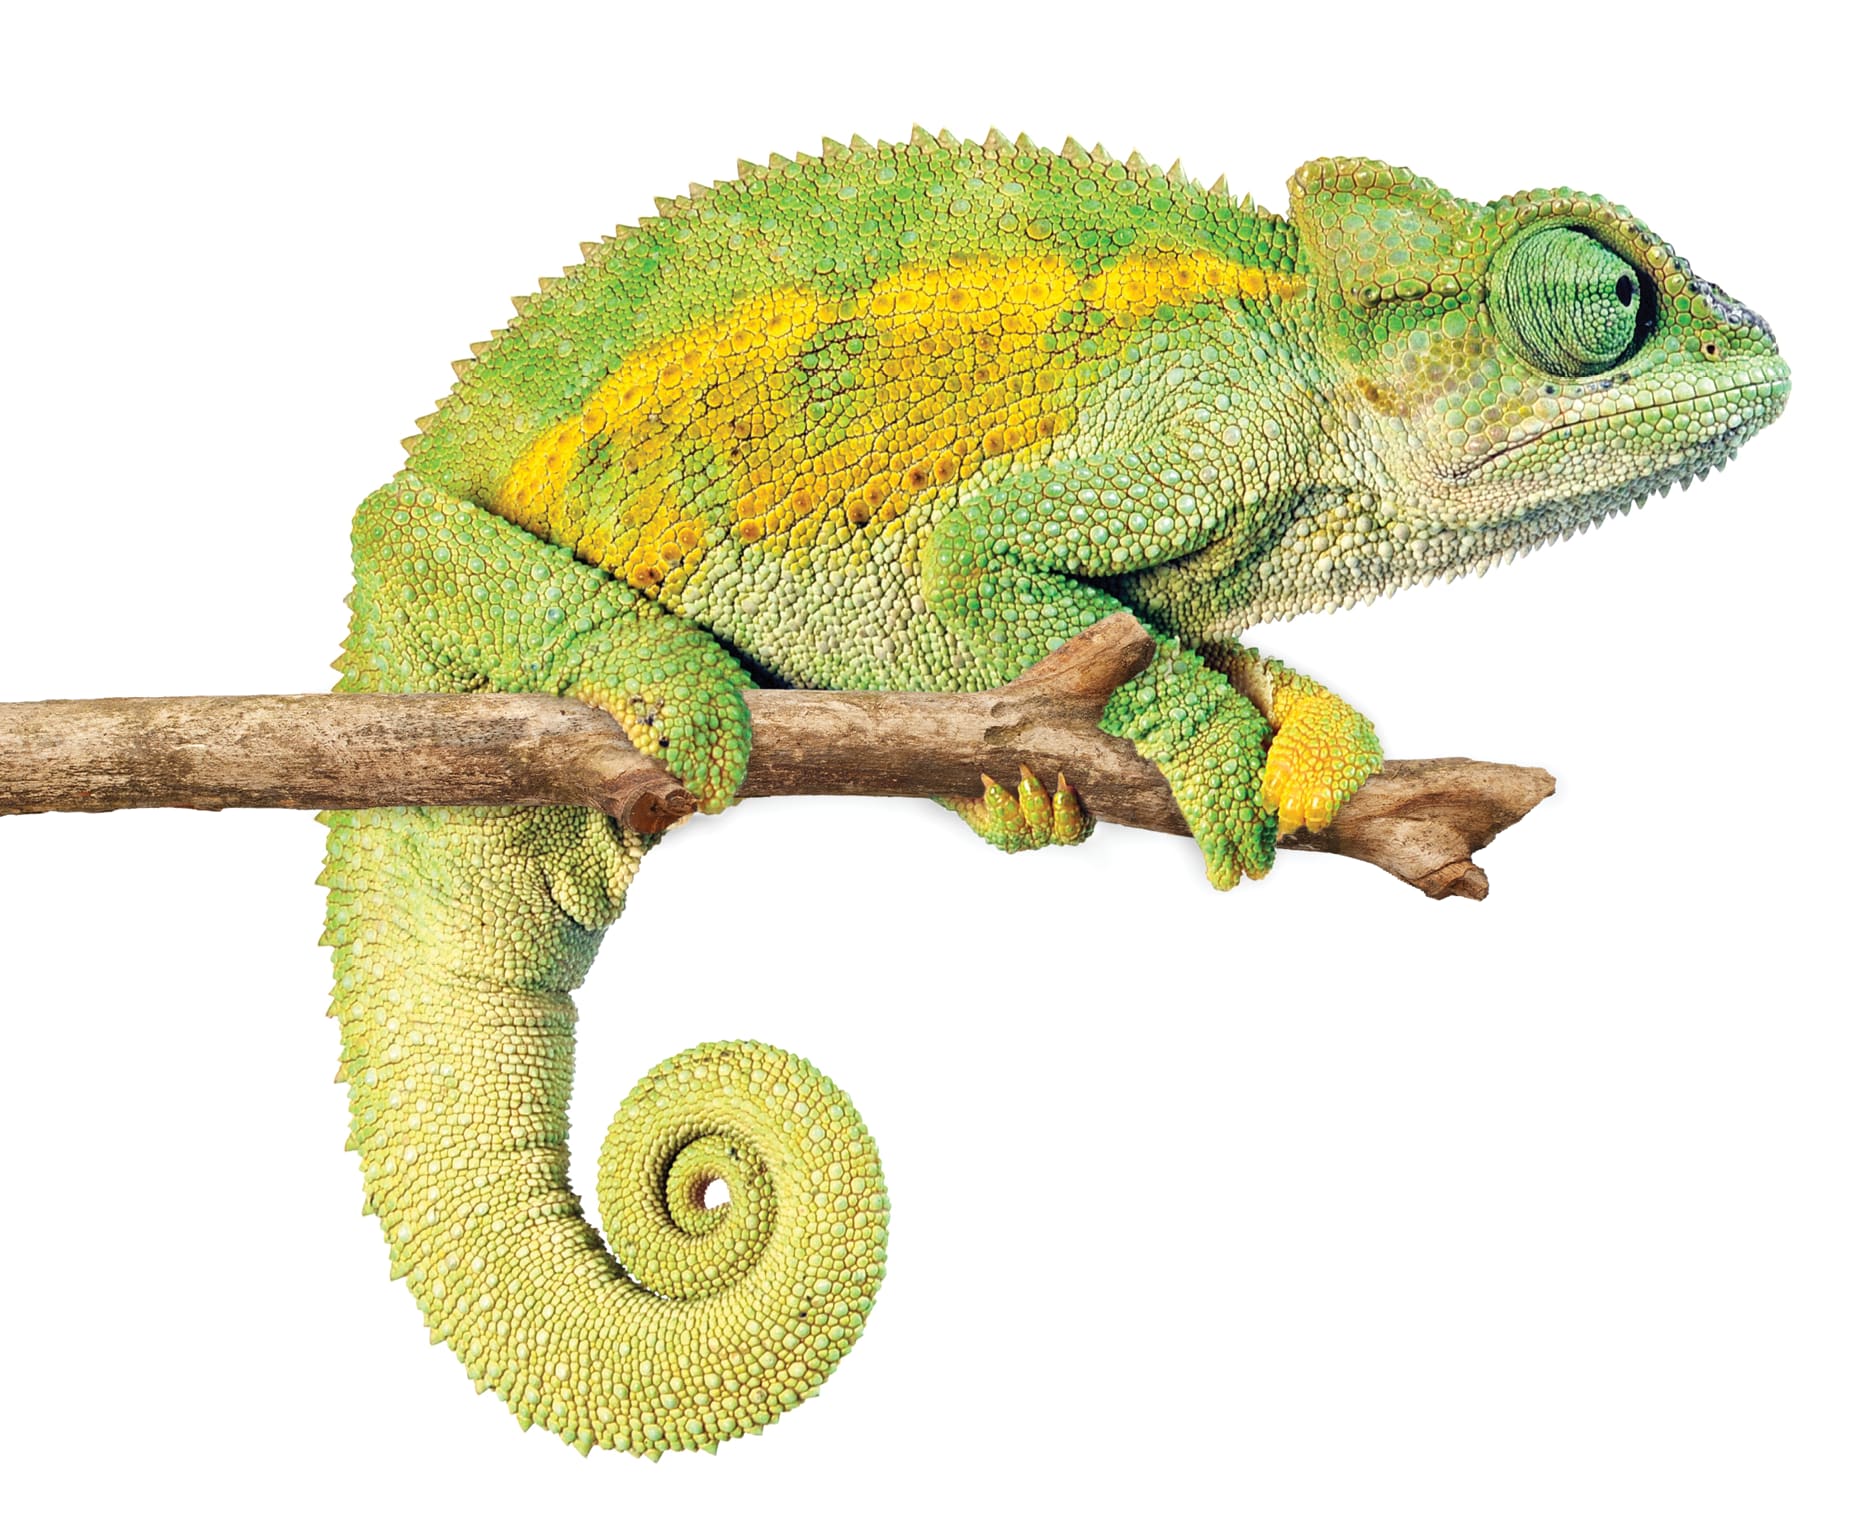 Can Chameleons Survive in Cold Weather?